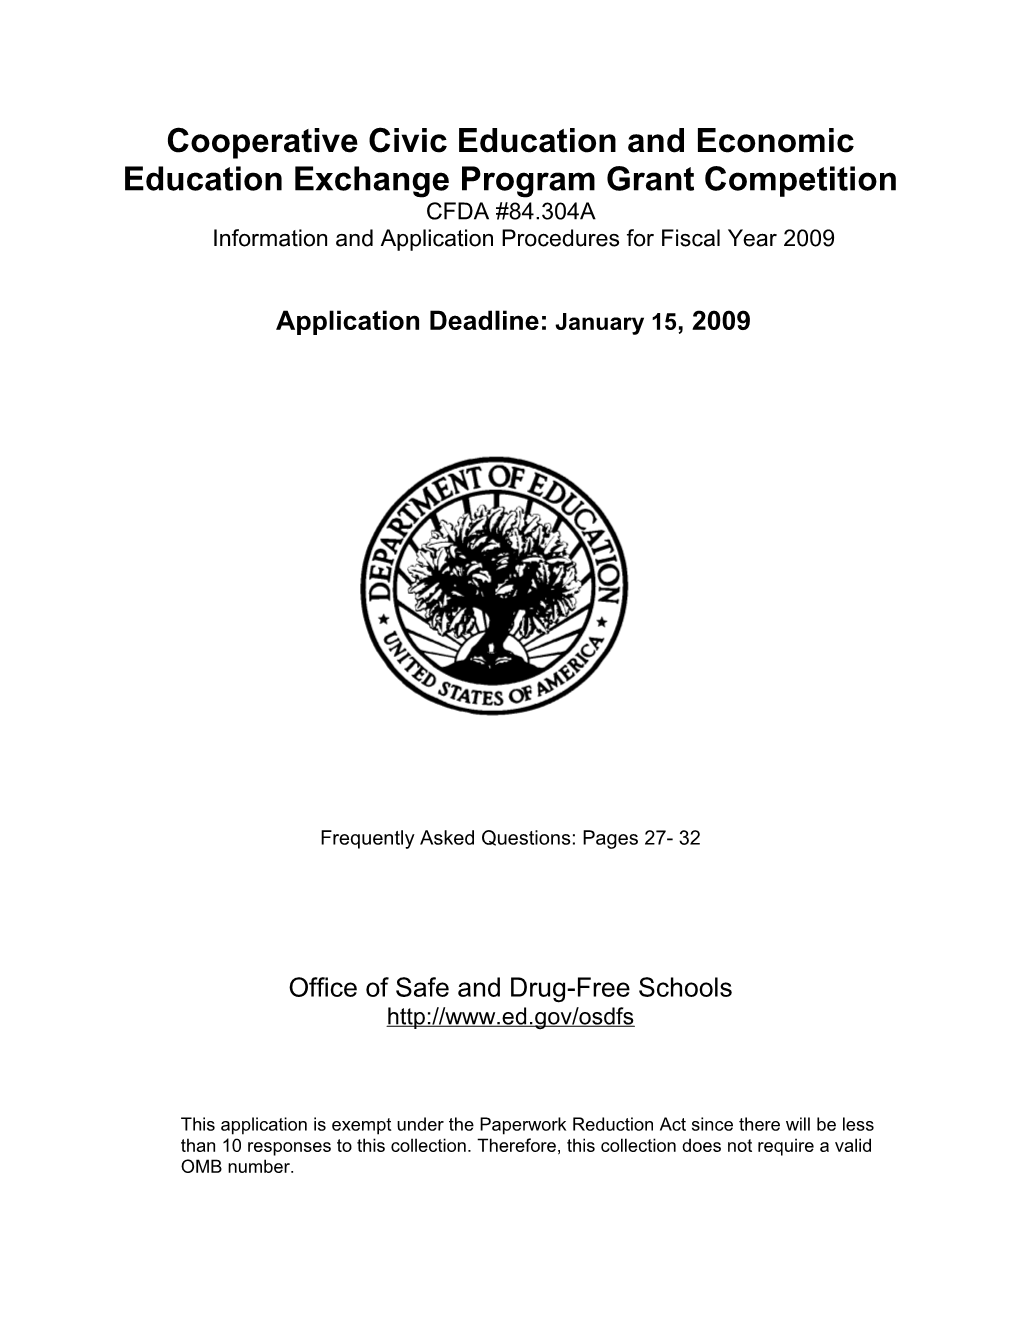 Cooperative Civic Education and Economic Education Exchange Program Grant Competition (MS Word)